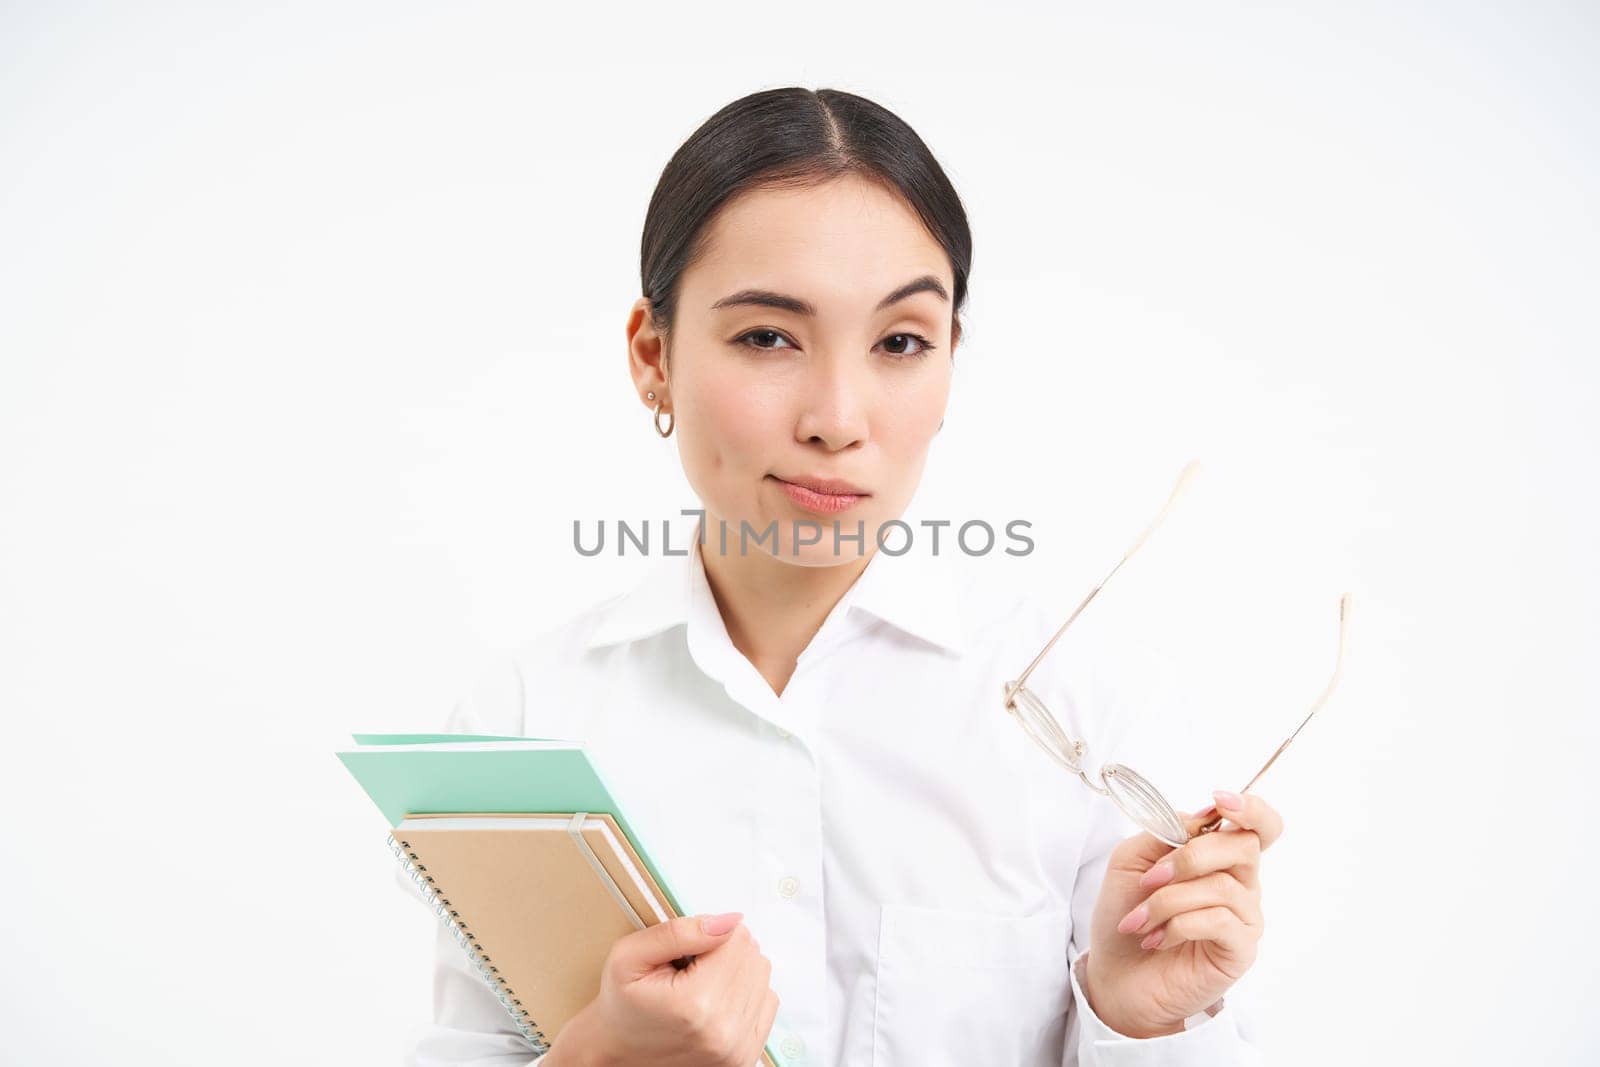 Confident young woman, office worker with glasses, holds notebooks, looks thoughtful, thinking, standing isolated on white background.